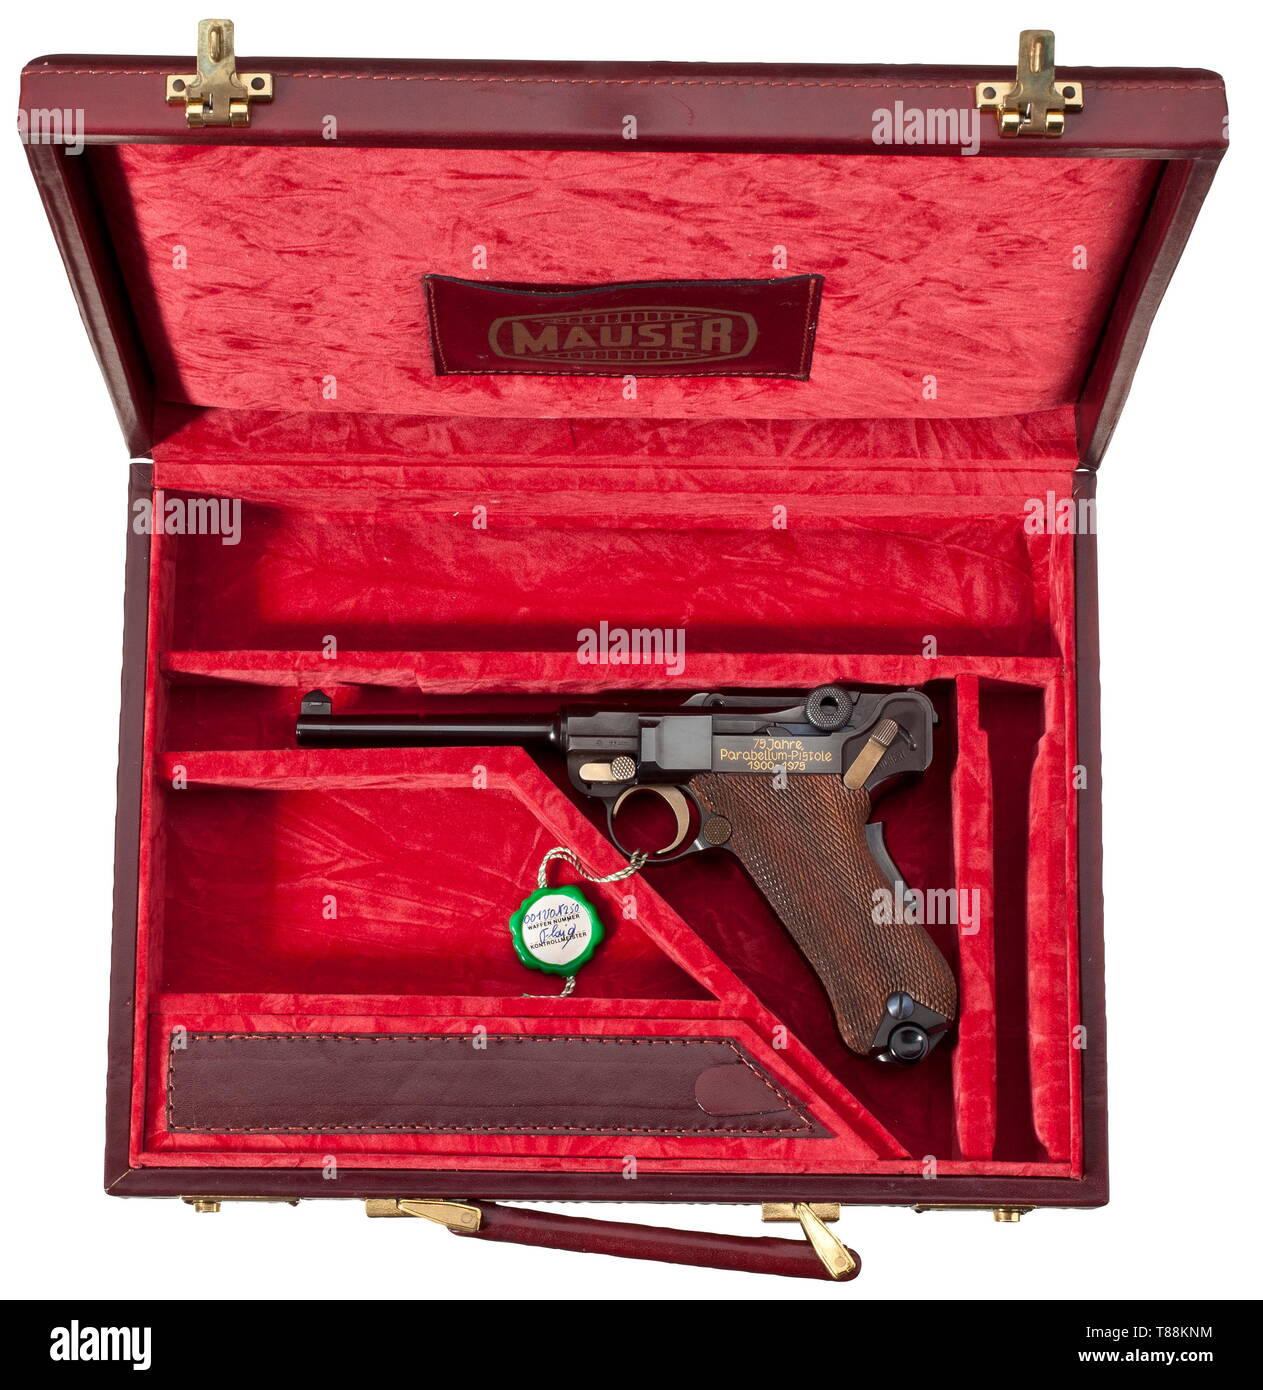 A Mauser Parabellum, commemorative model '75 Jahre Parabellum-Pistole', in its case Cal. 7.65 Parabellum, no. 001/250. Bright bore, length 120 mm. Proof-marked 1973. Grip safety. On chamber etched engraving of Swiss cross inside corona, on front toggle link Mauser barrel. On left side of frame inlaid in gold '75 Jahre / Parabellum - Pistole / 1900 - 1975'. Complete black highly polished finish. Operational parts strawed. Walnut grip panels. Magazine. Comes with wine-red leather case, dimensions 36 x 26 x 7 cm, lined with red velvet. Two case keys, Additional-Rights-Clearance-Info-Not-Available Stock Photo